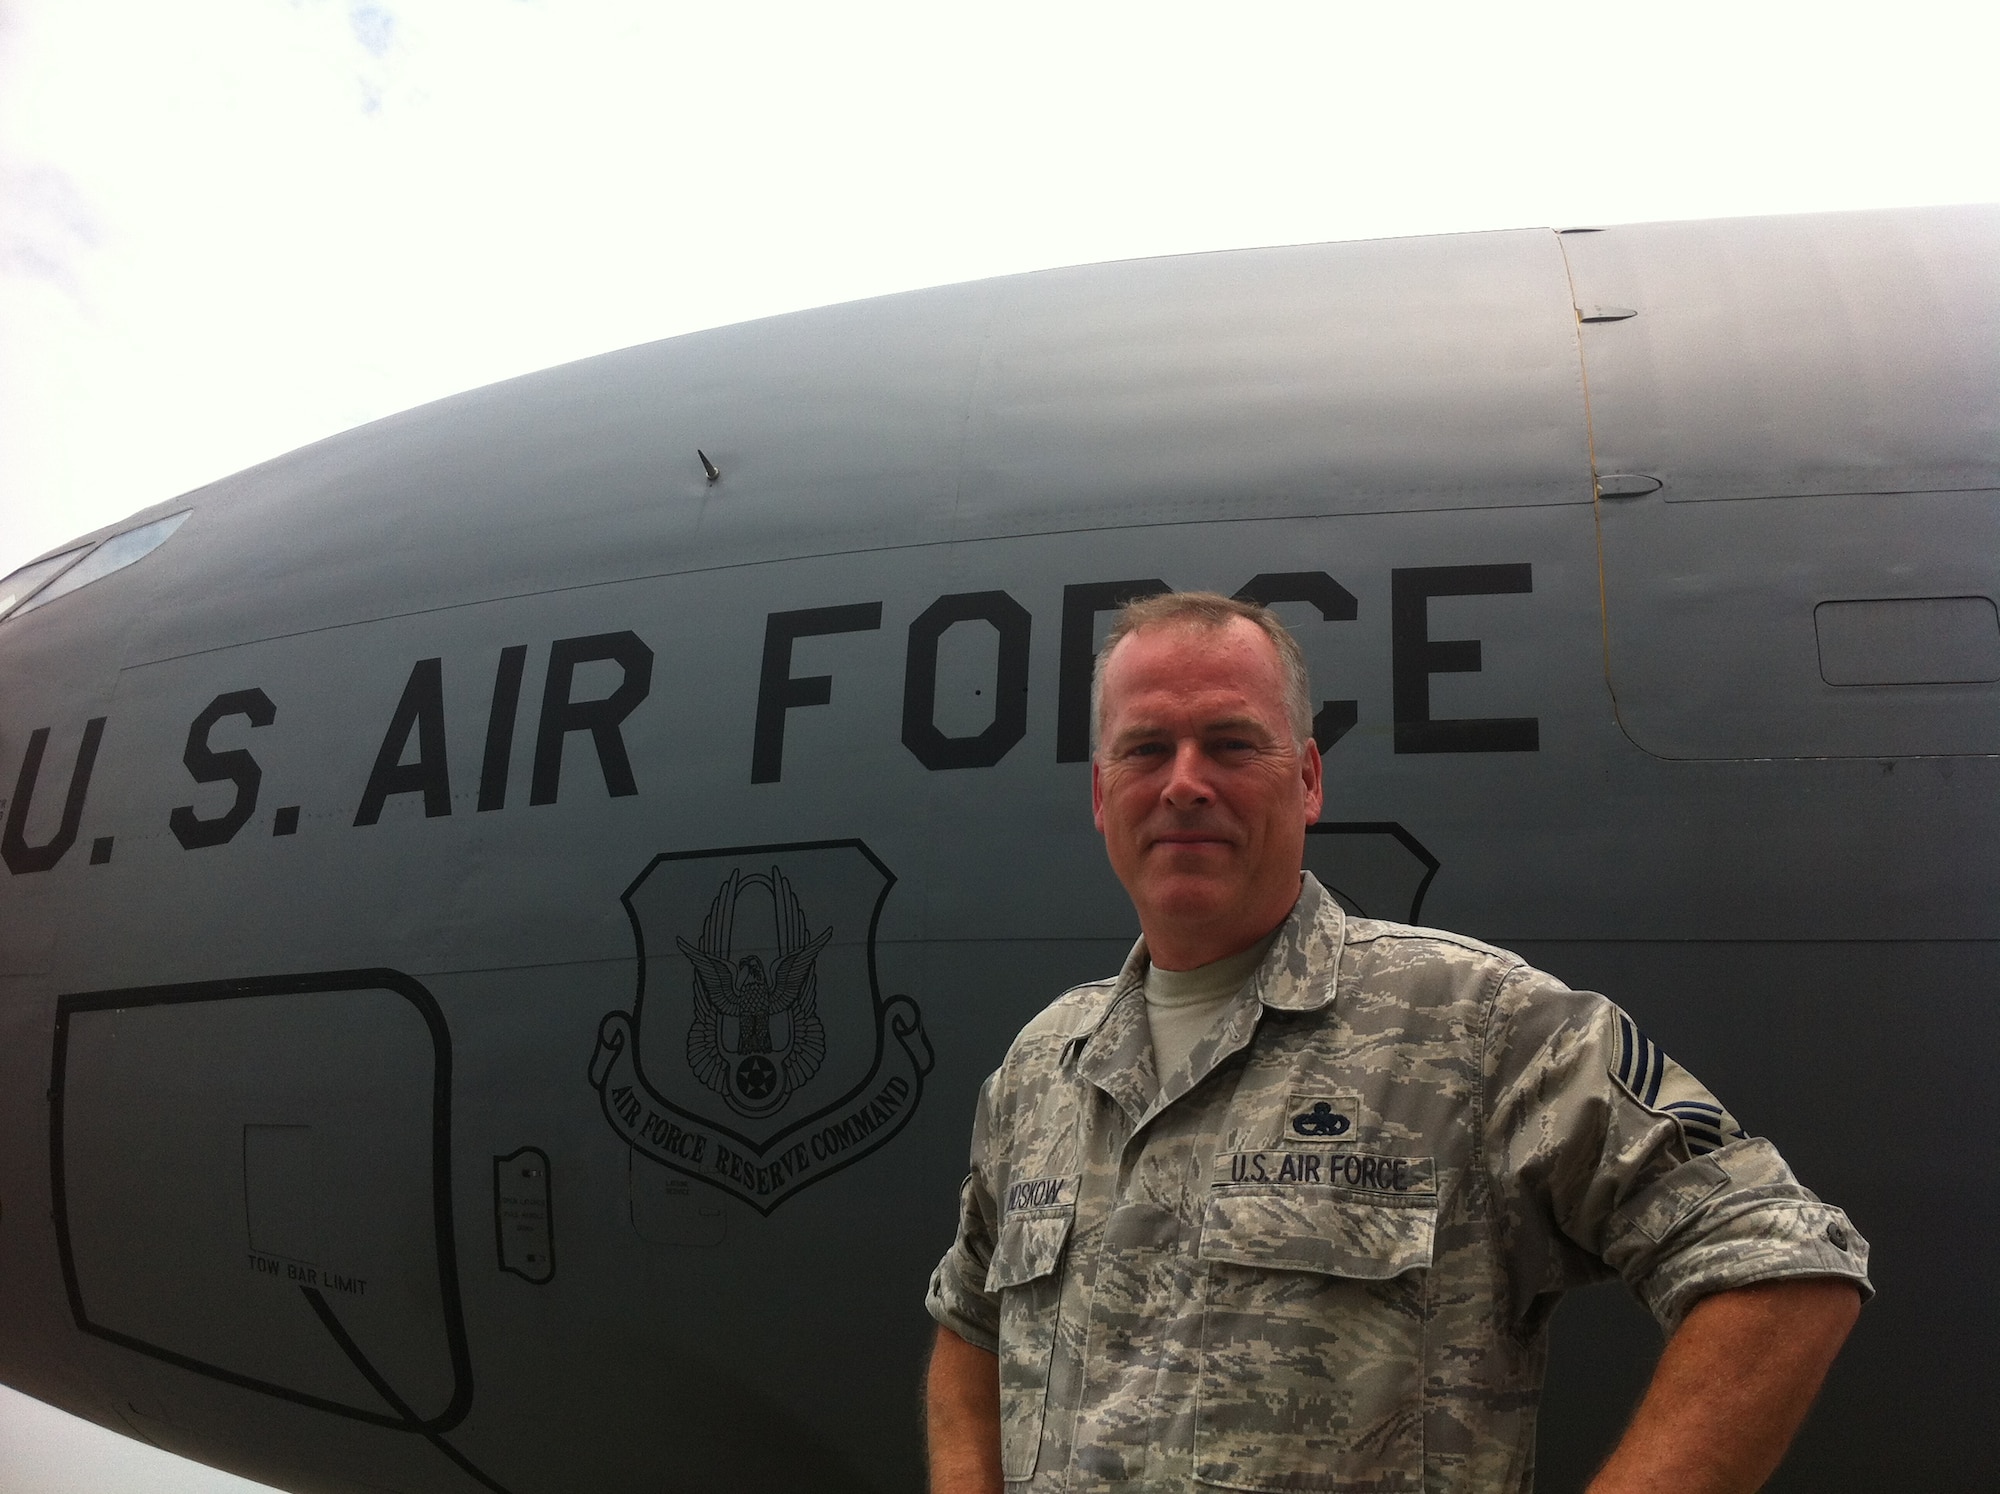 JOINT BASE ANDREWS, Md.,- Chief Master Sgt. Vernon Lundskow, superintendent of the 459th Aircraft Maintenance Squadron, stands in front of a KC-135 Stratotanker of the 459th Air Refueling Wing. Lundskow has been the rank of chief master sergeant for 22 years and retires from the military with 37 years of service; 22 years in the U.S. Air Force Reserve and five years with the U.S. Navy. (U.S. Air Force photo/ Senior Airman Katie Spencer)